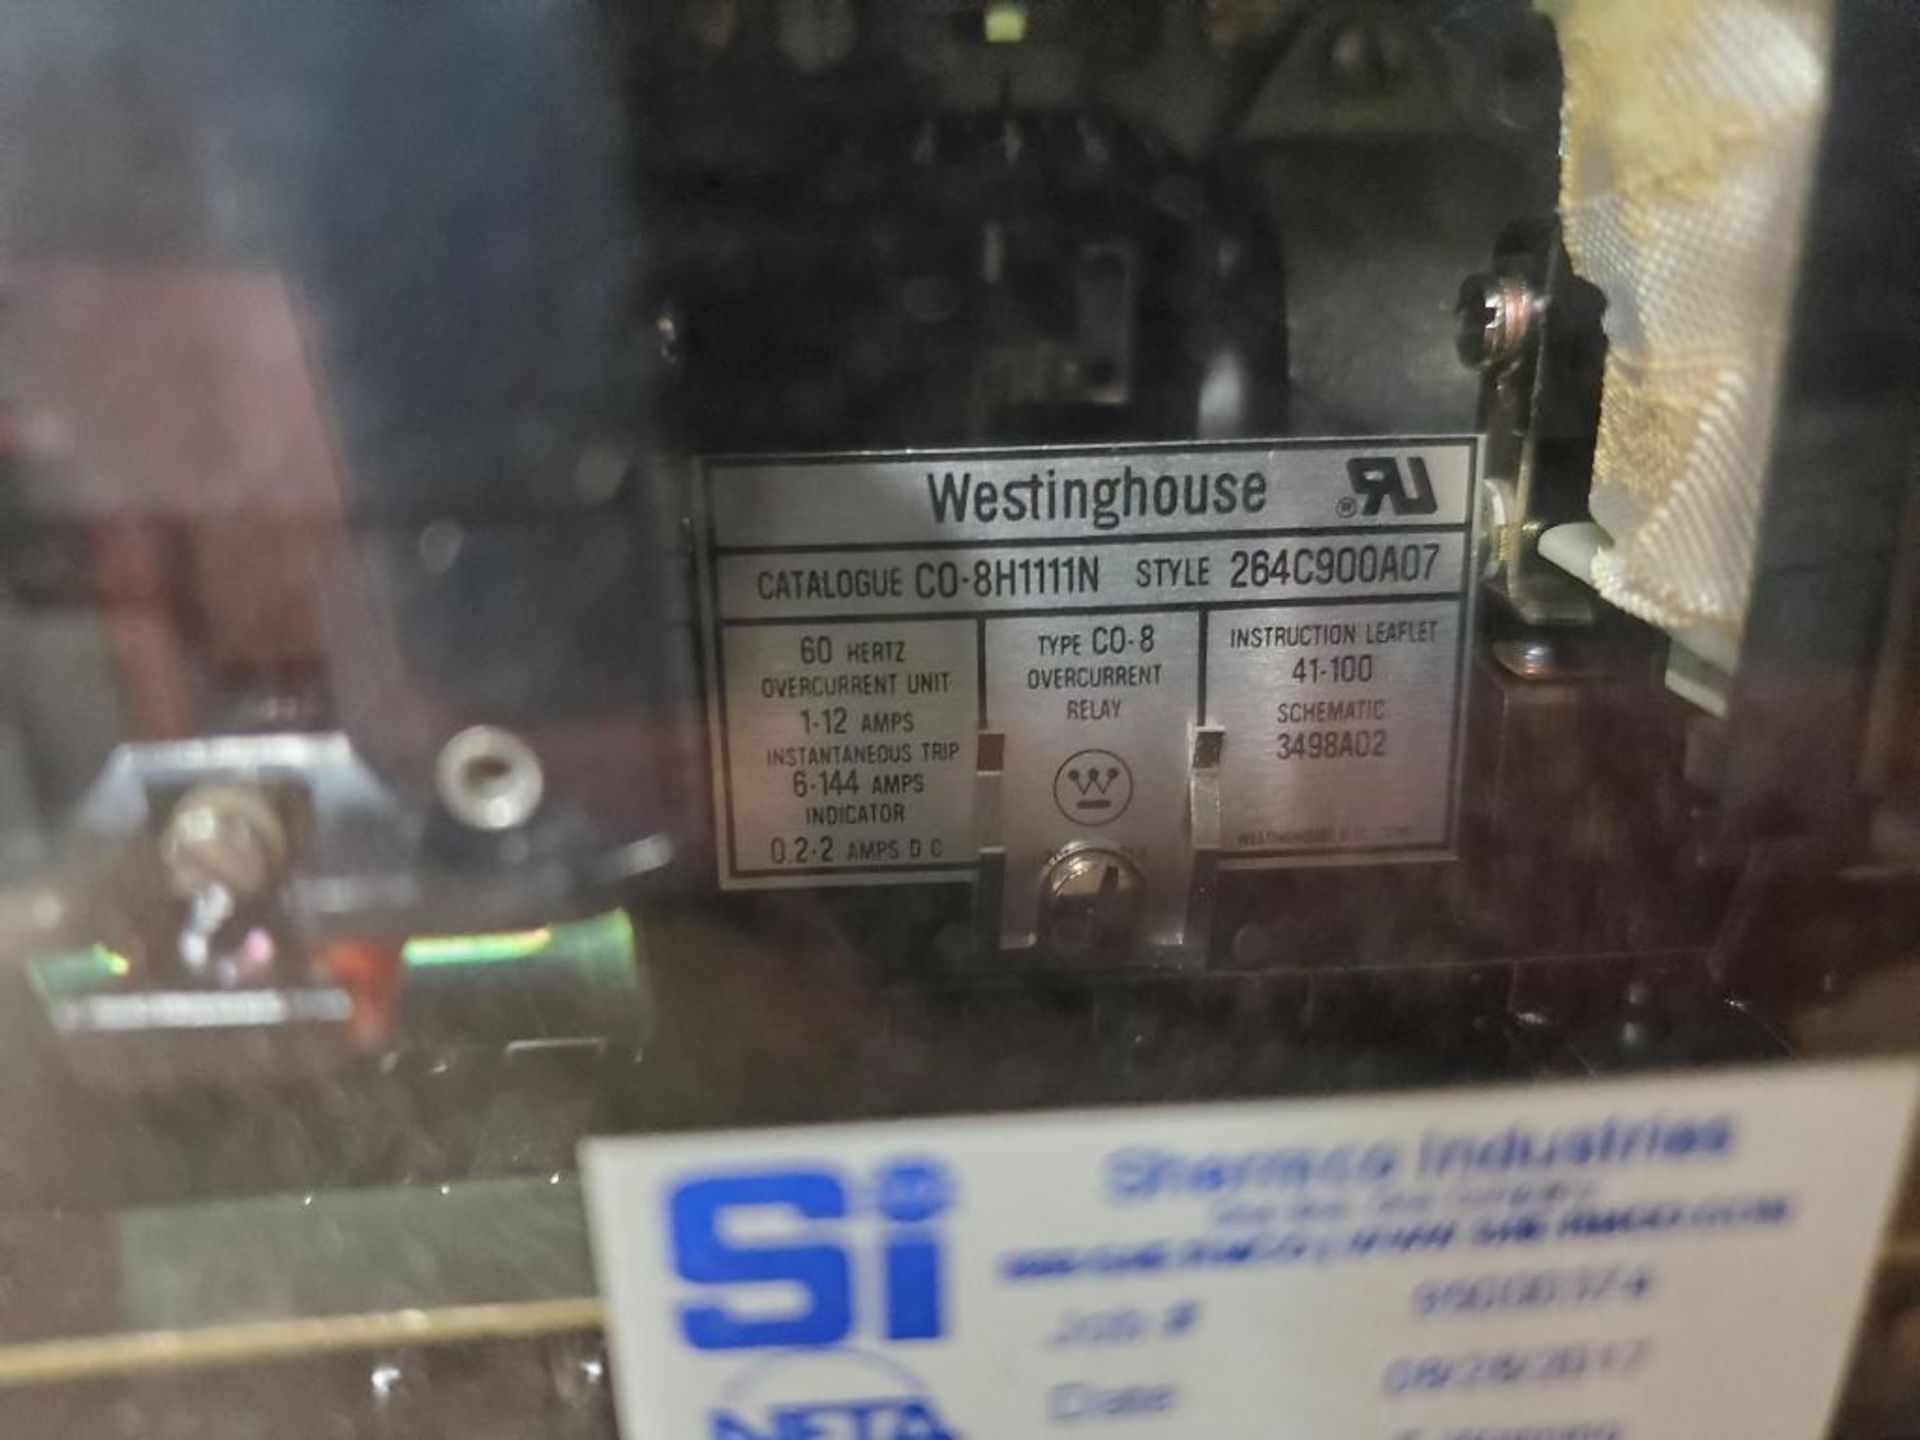 Qty 5 - Westinghouse C0-9H1111N overcurrent relay. - Image 5 of 12